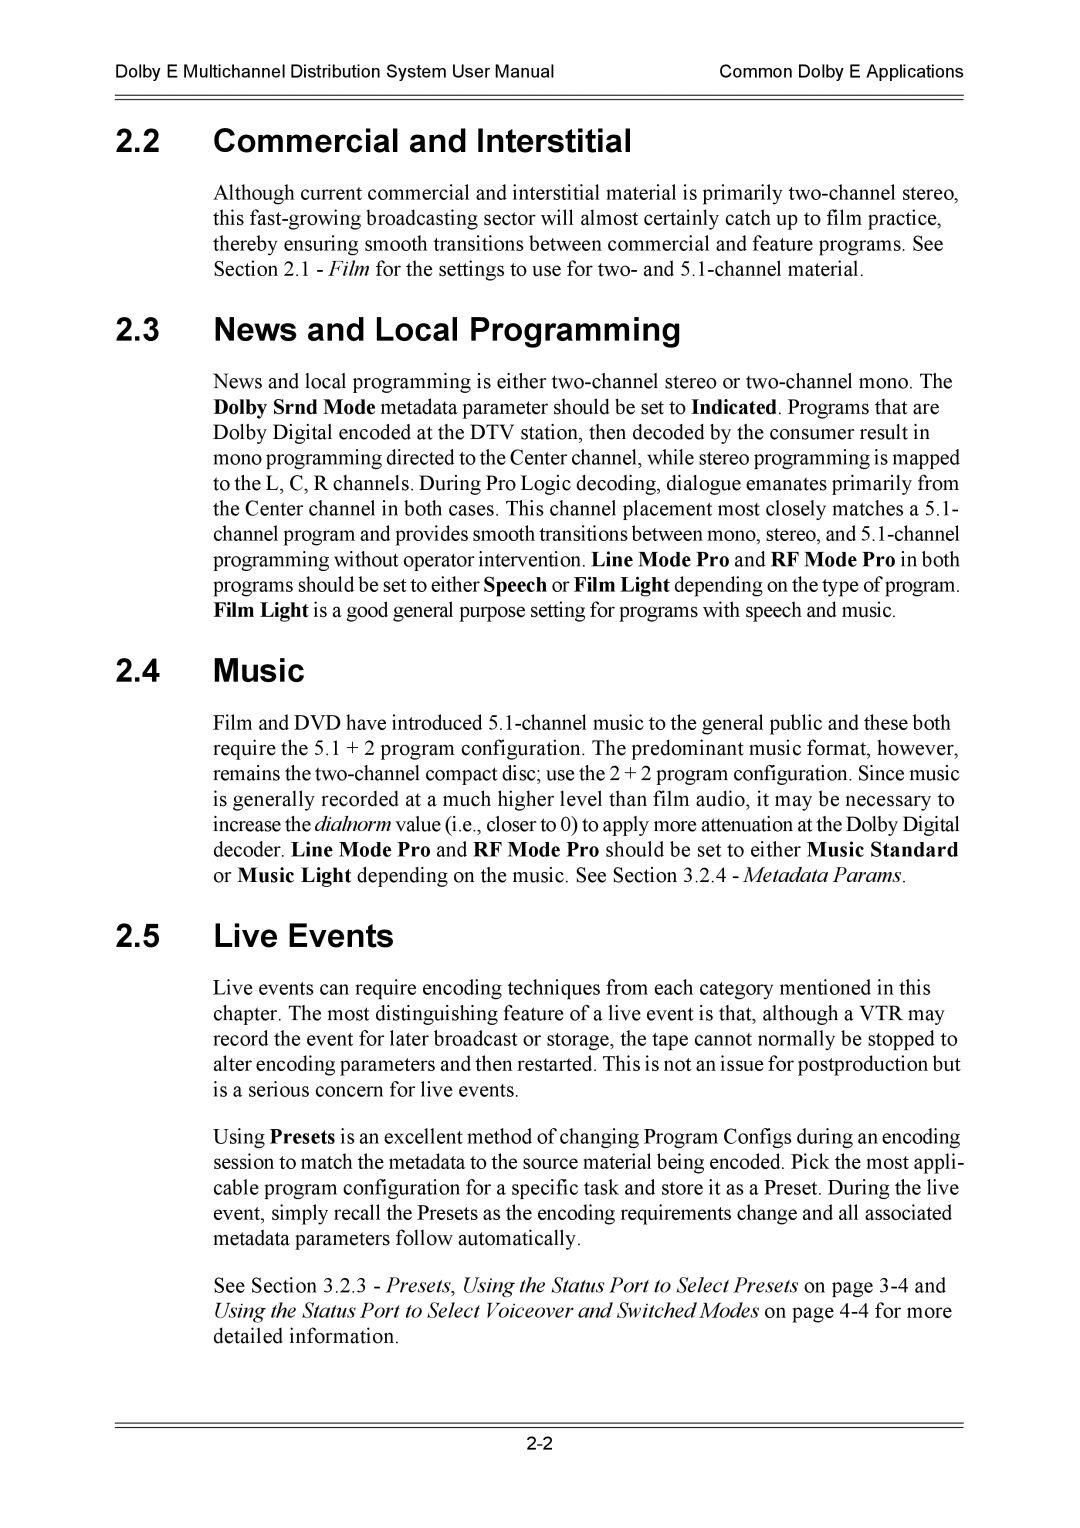 Dolby Laboratories DP571, DP572 user manual Commercial and Interstitial, News and Local Programming, Music, Live Events 